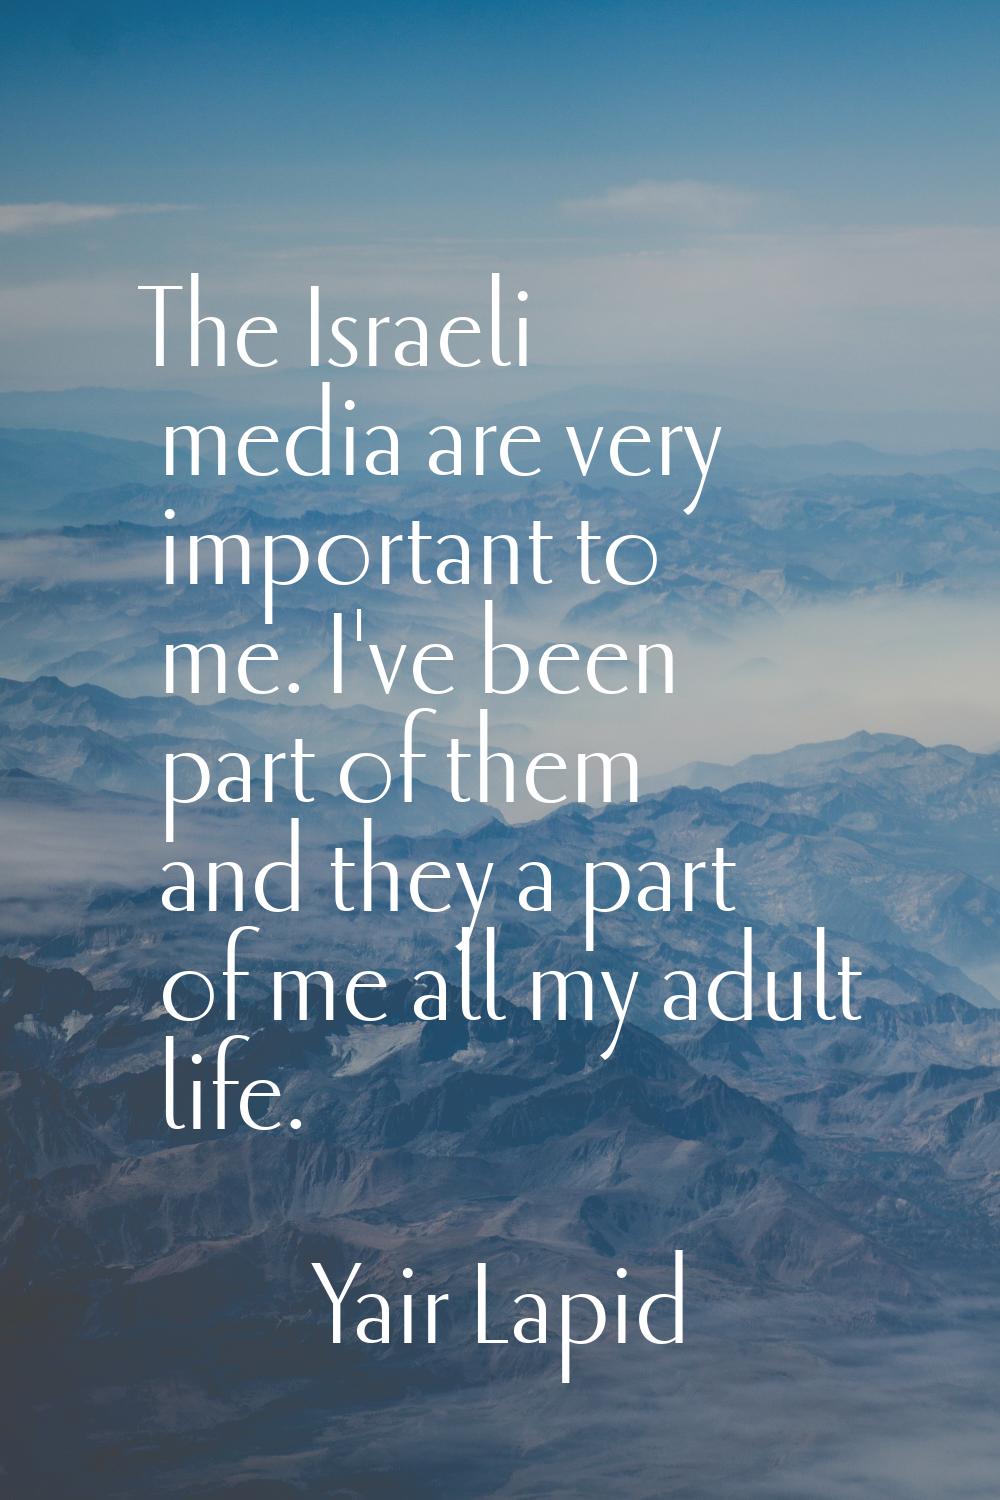 The Israeli media are very important to me. I've been part of them and they a part of me all my adu